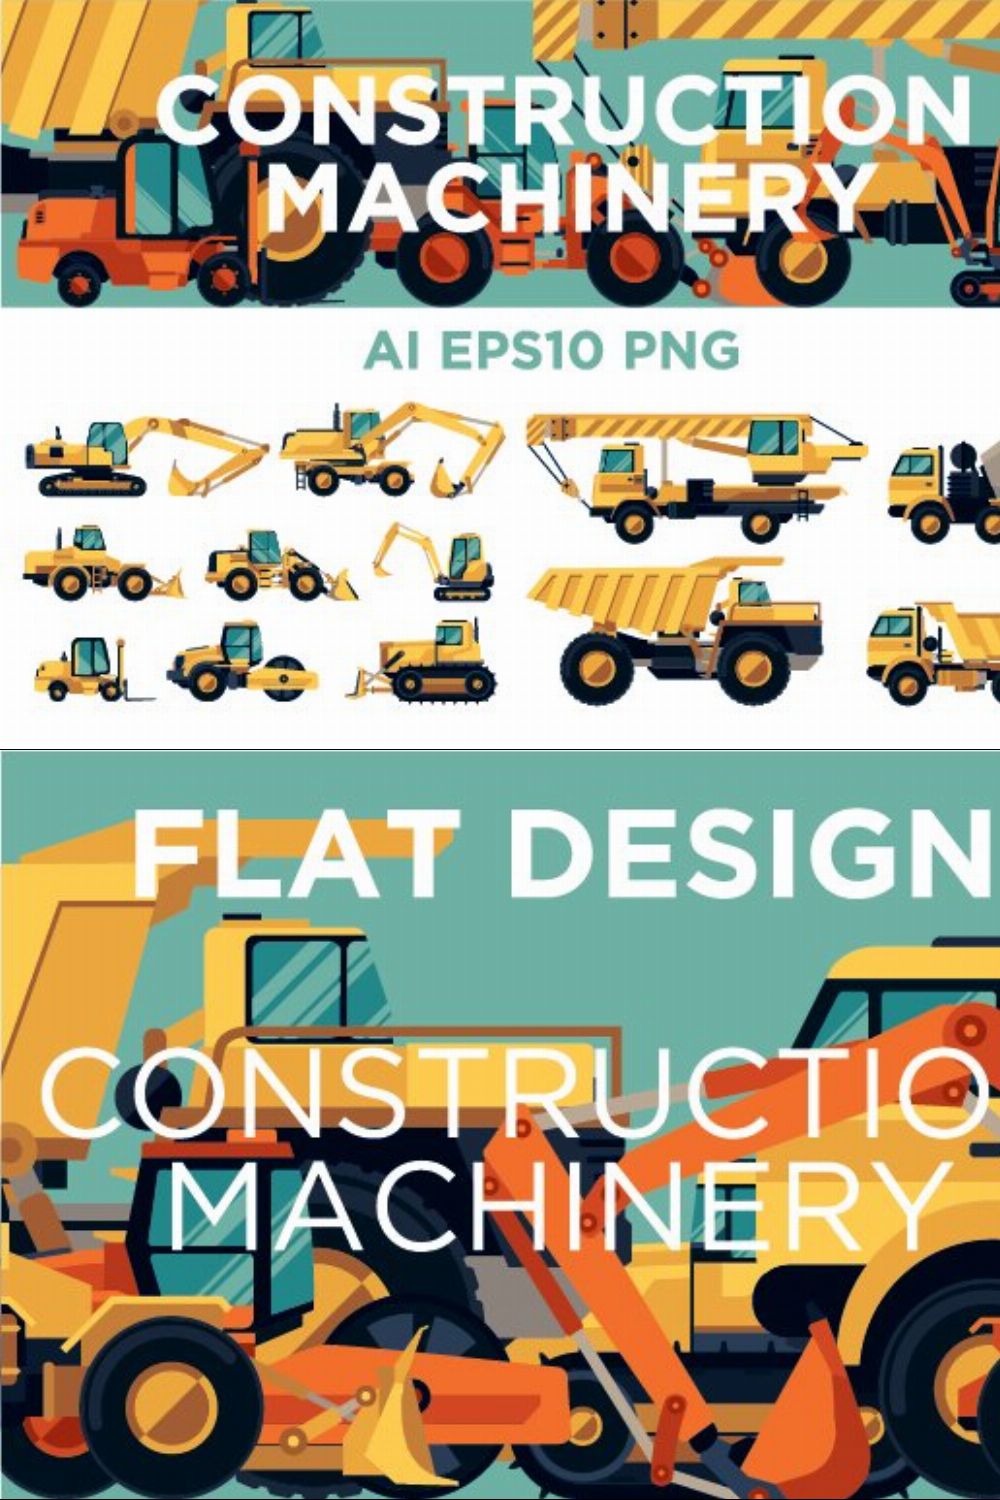 Construction machinery pinterest preview image.